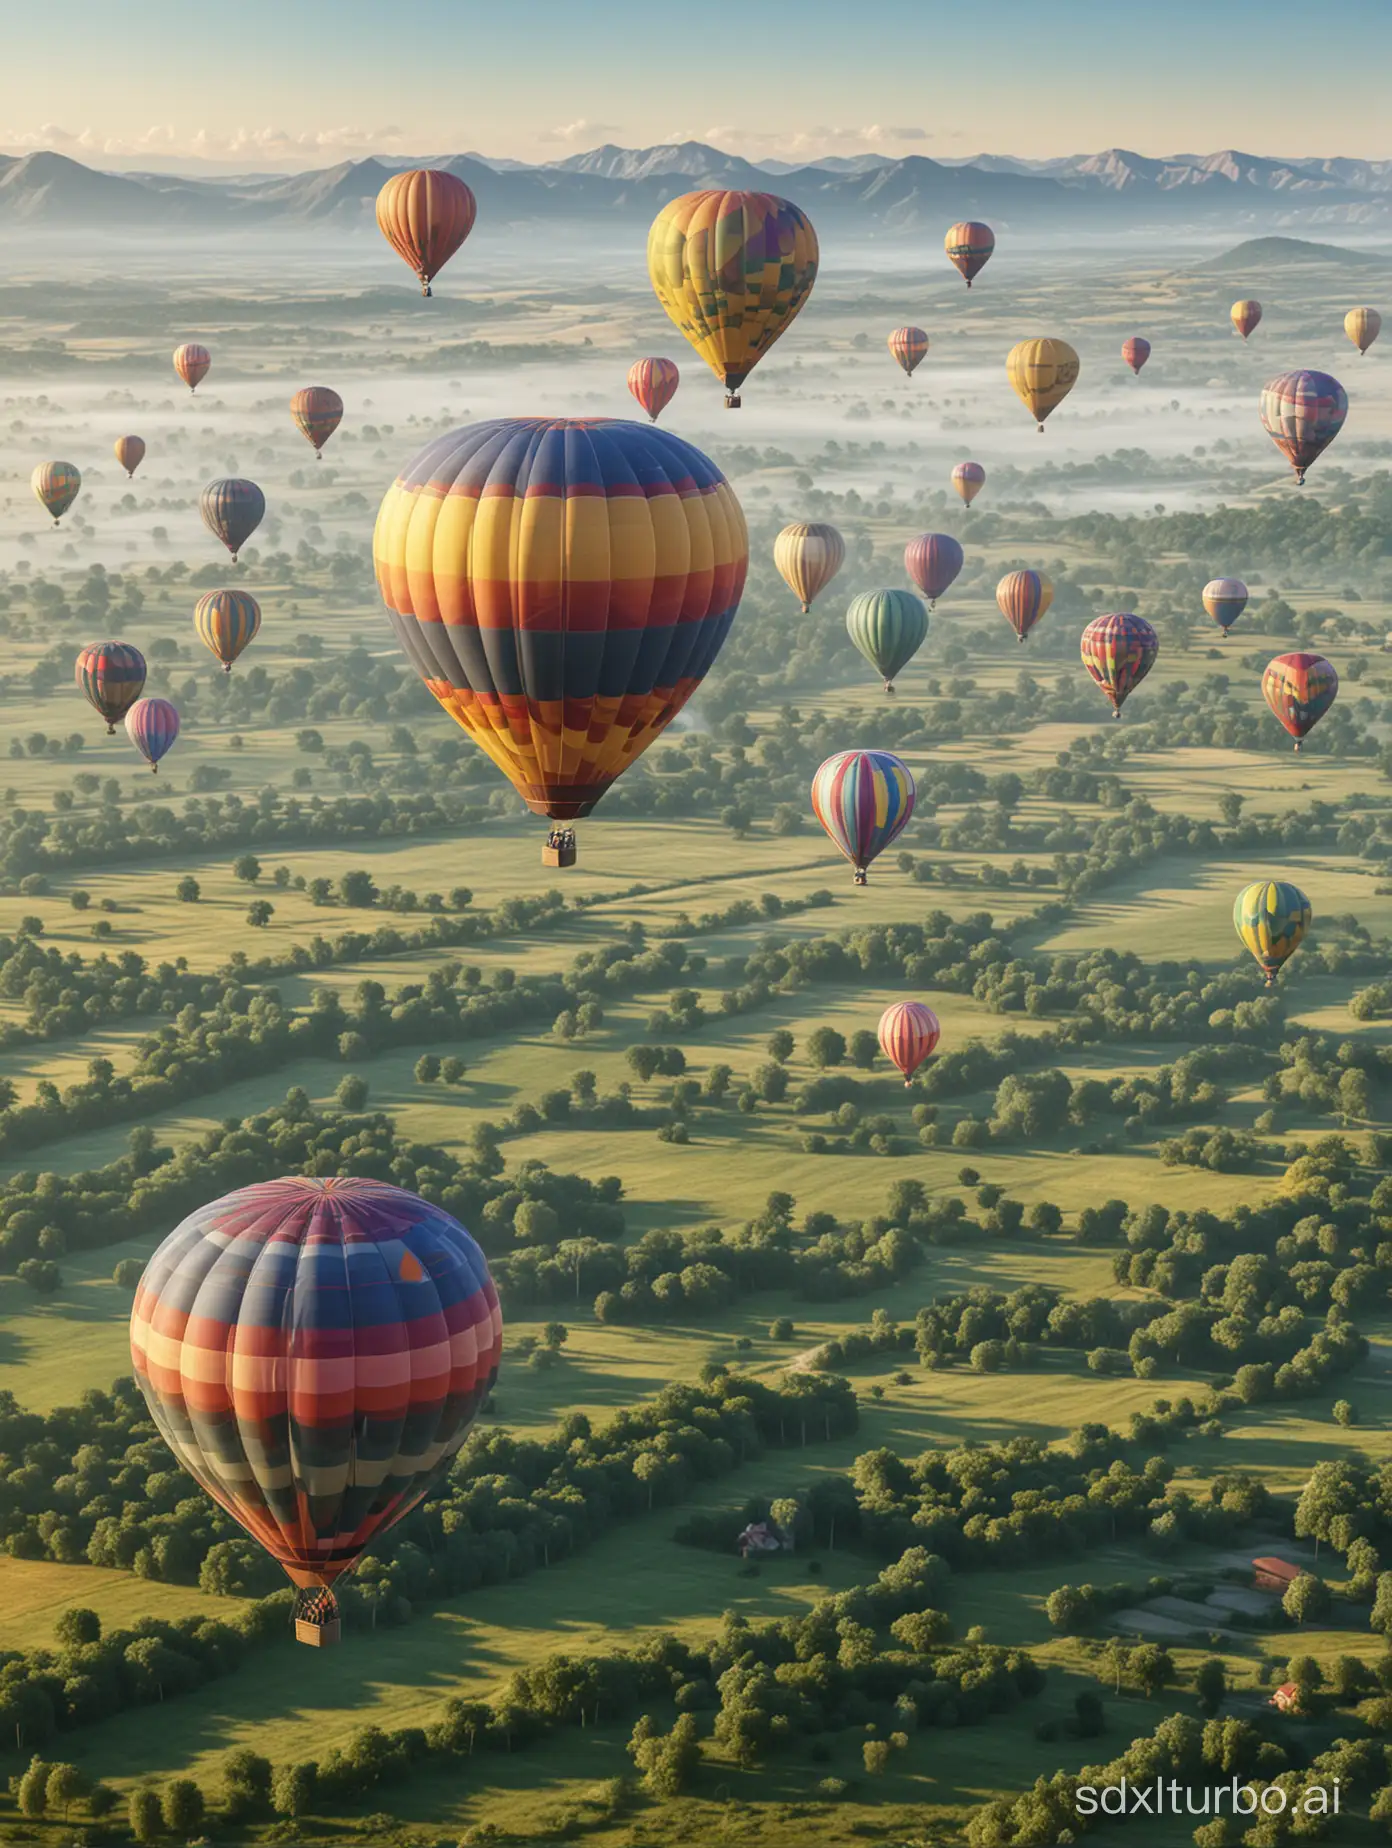 Colorful-Hot-Air-Balloons-Float-Over-Lush-Countryside-Landscape